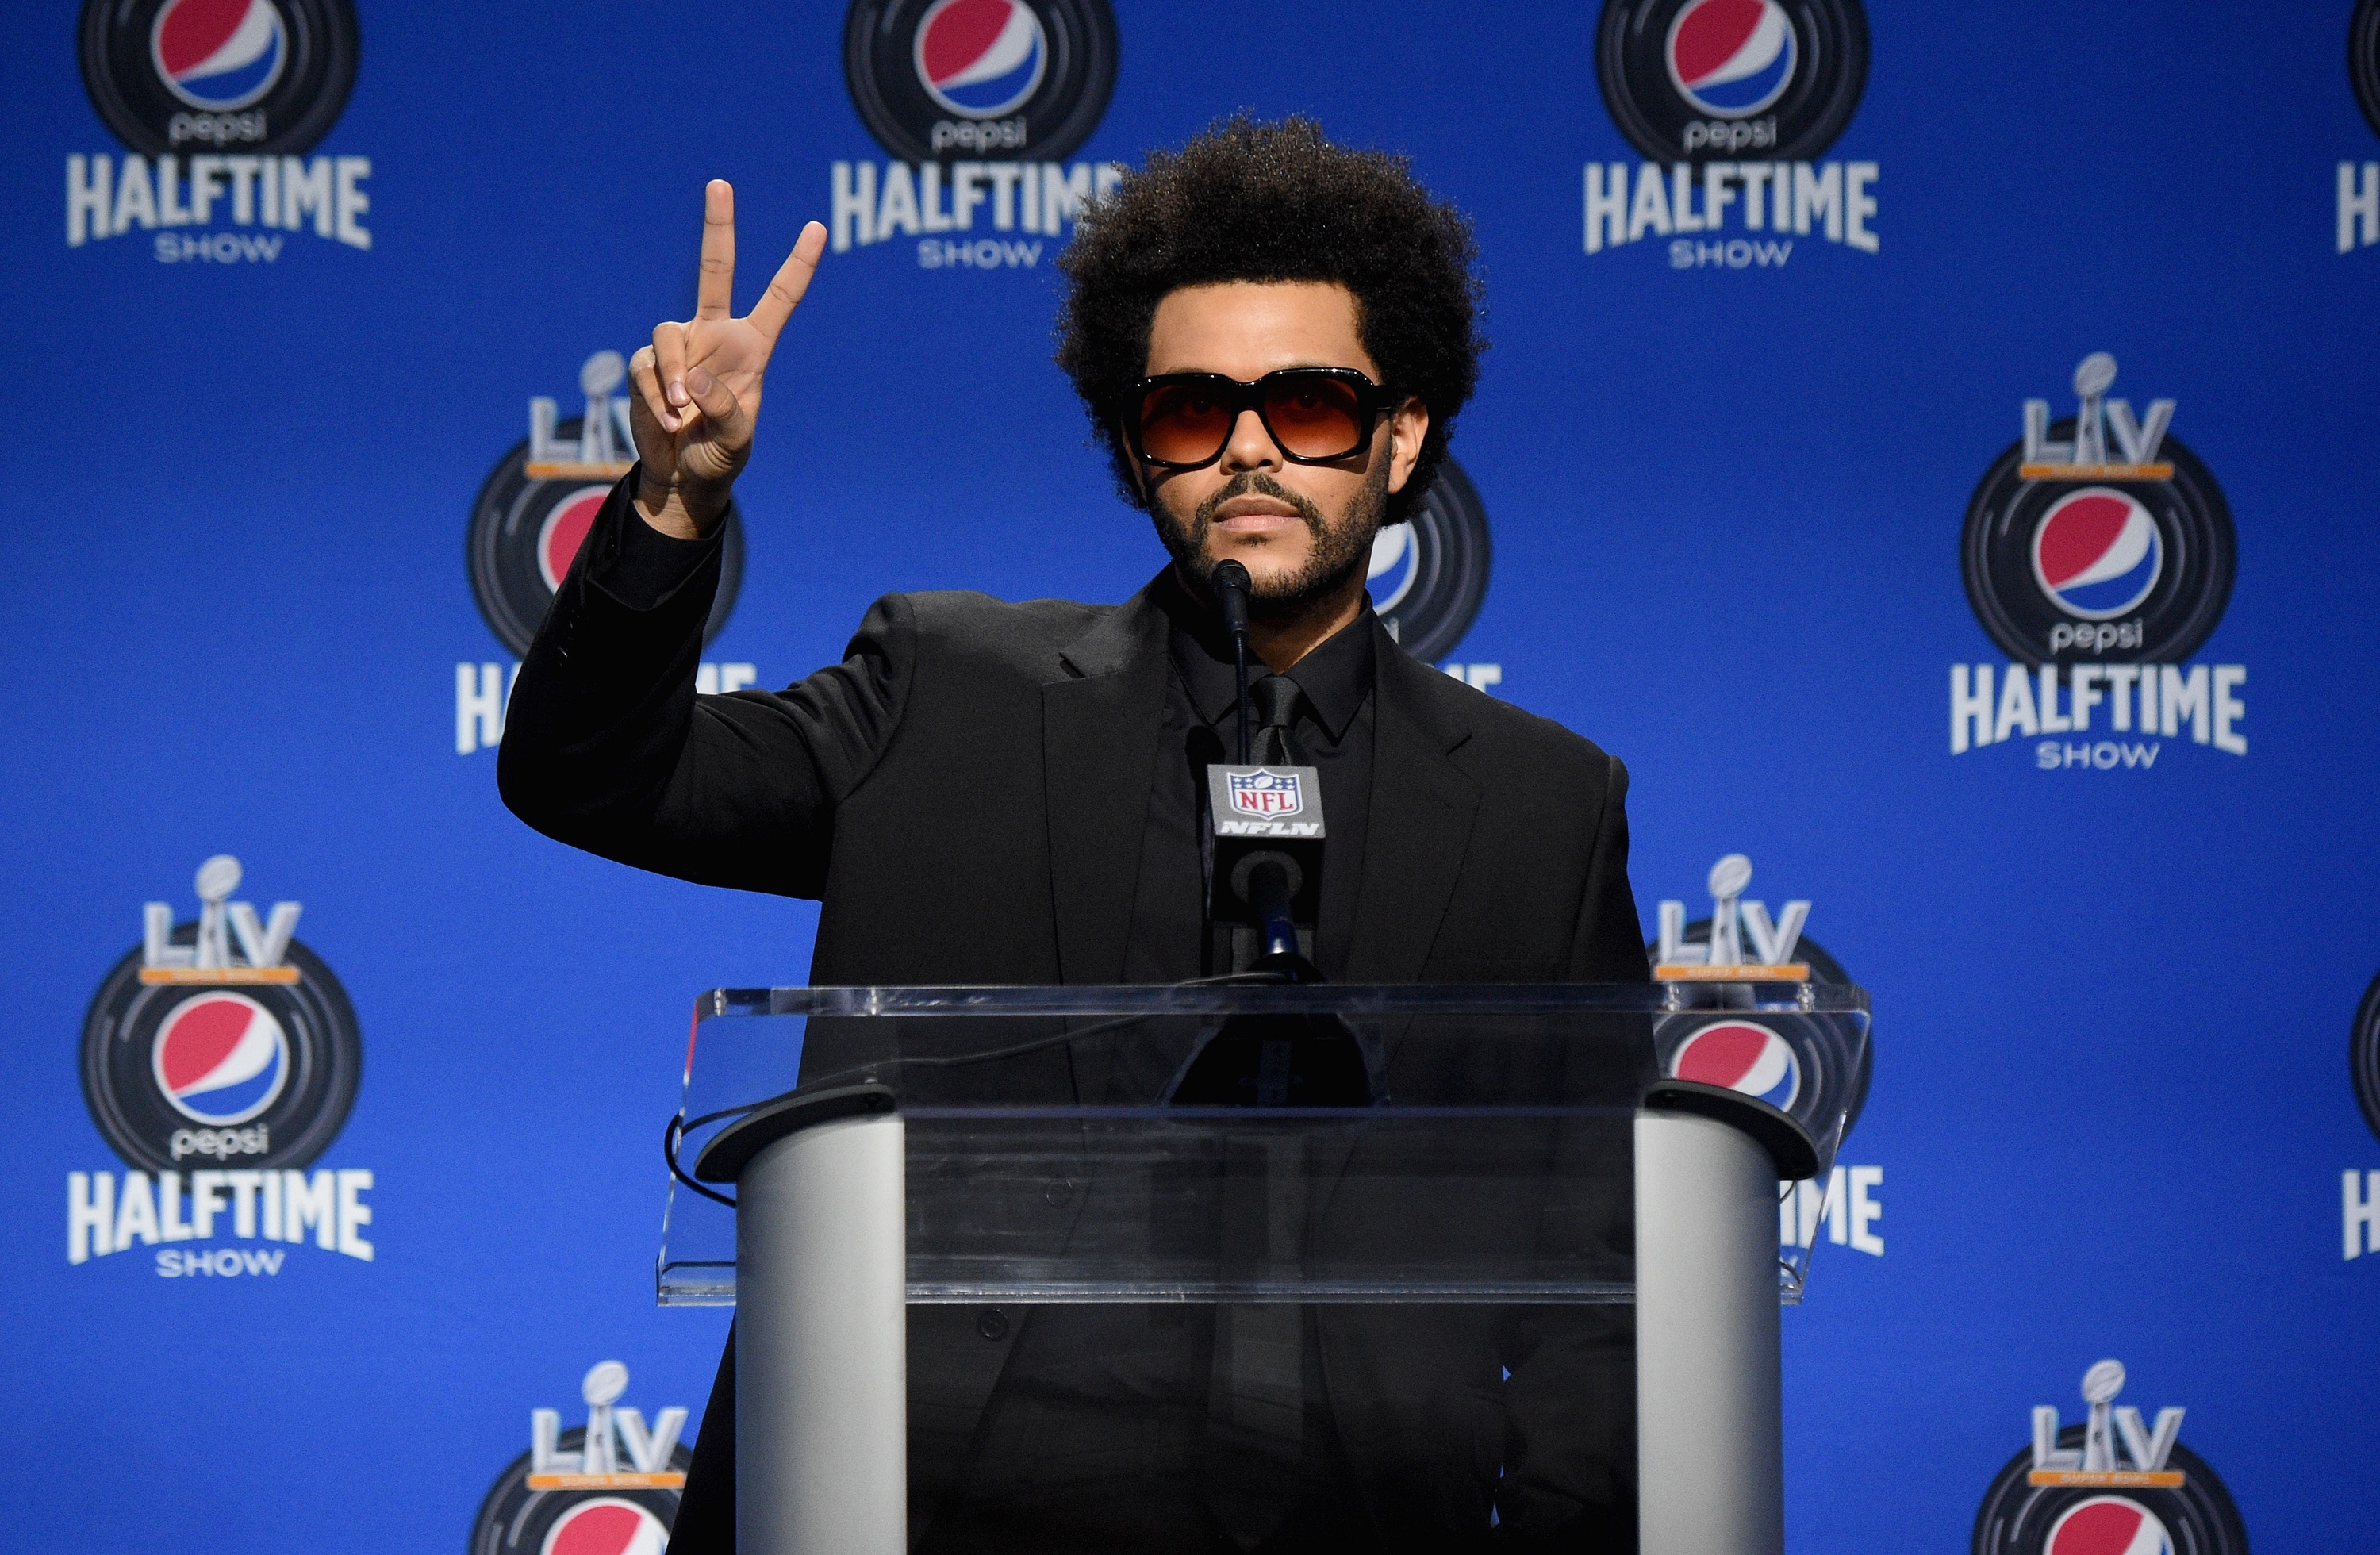 The Weeknd ahead of the 2021 Super Bowl halftime show